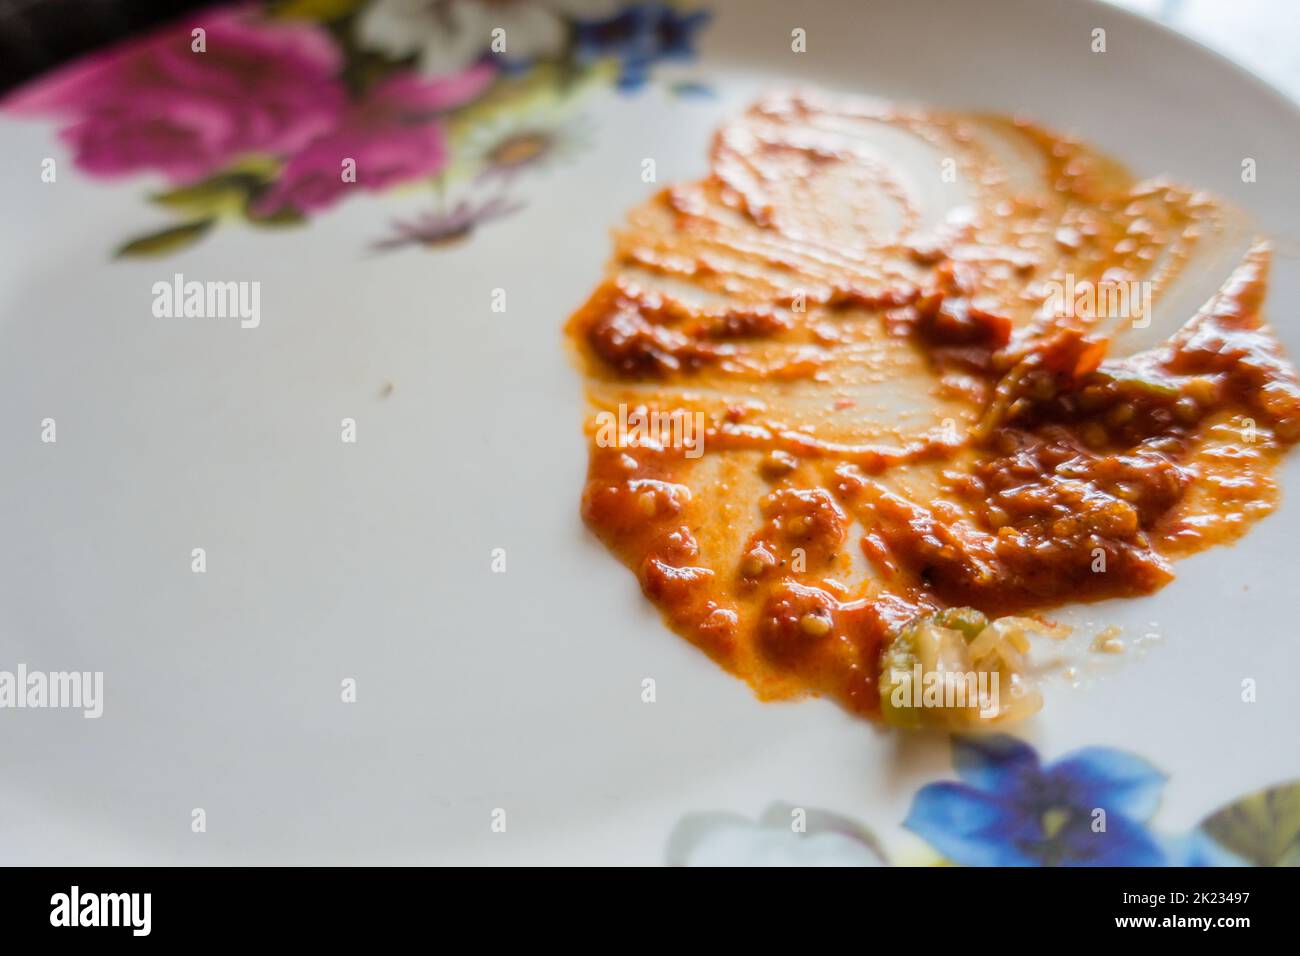 An after snack empty white plate with left over red sauce. India Stock Photo